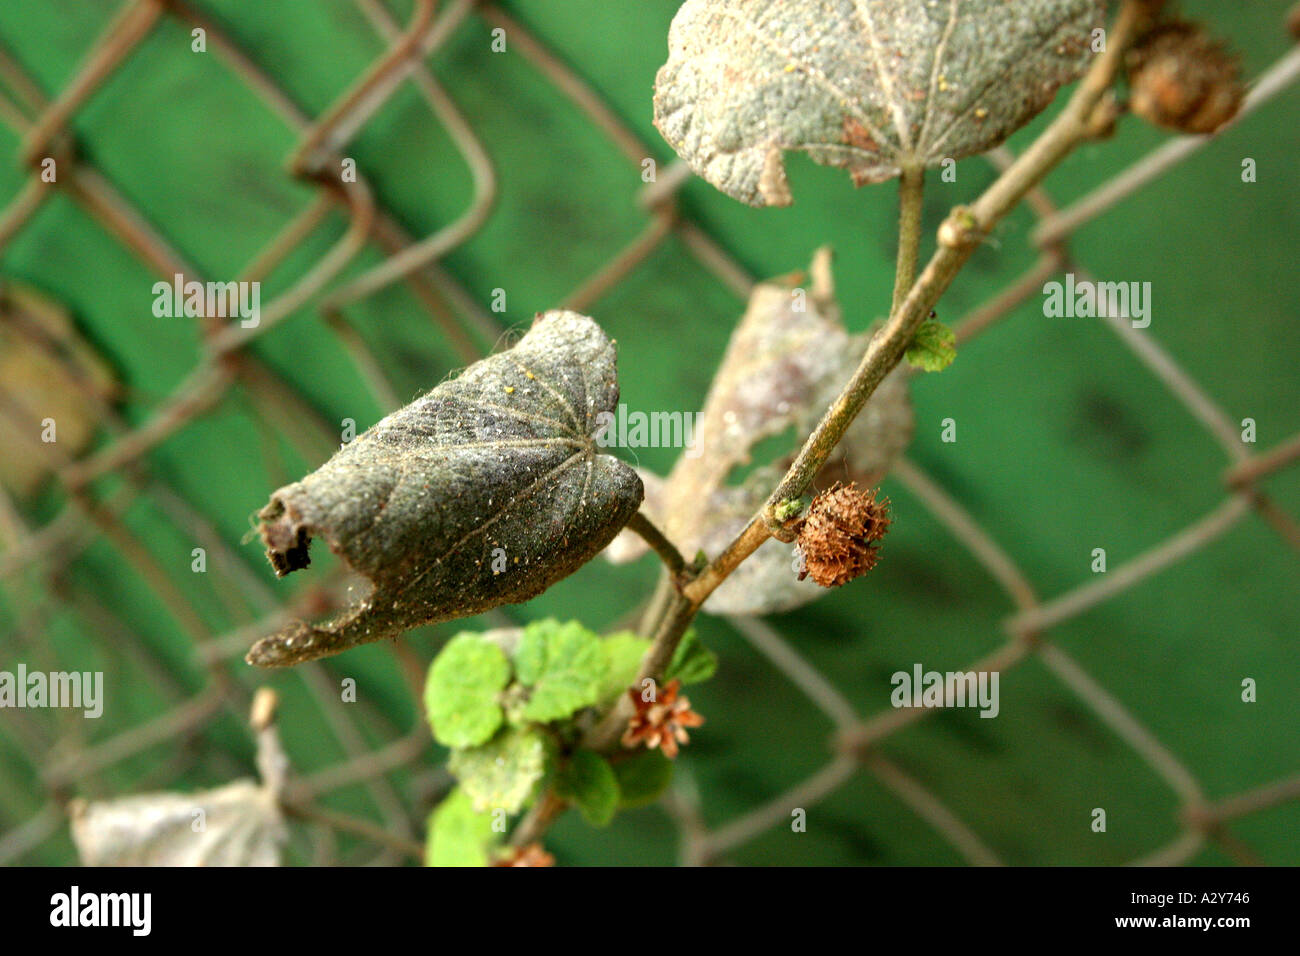 pollution plant contamination environment protection section leaf death withered faded sear sere Stock Photo